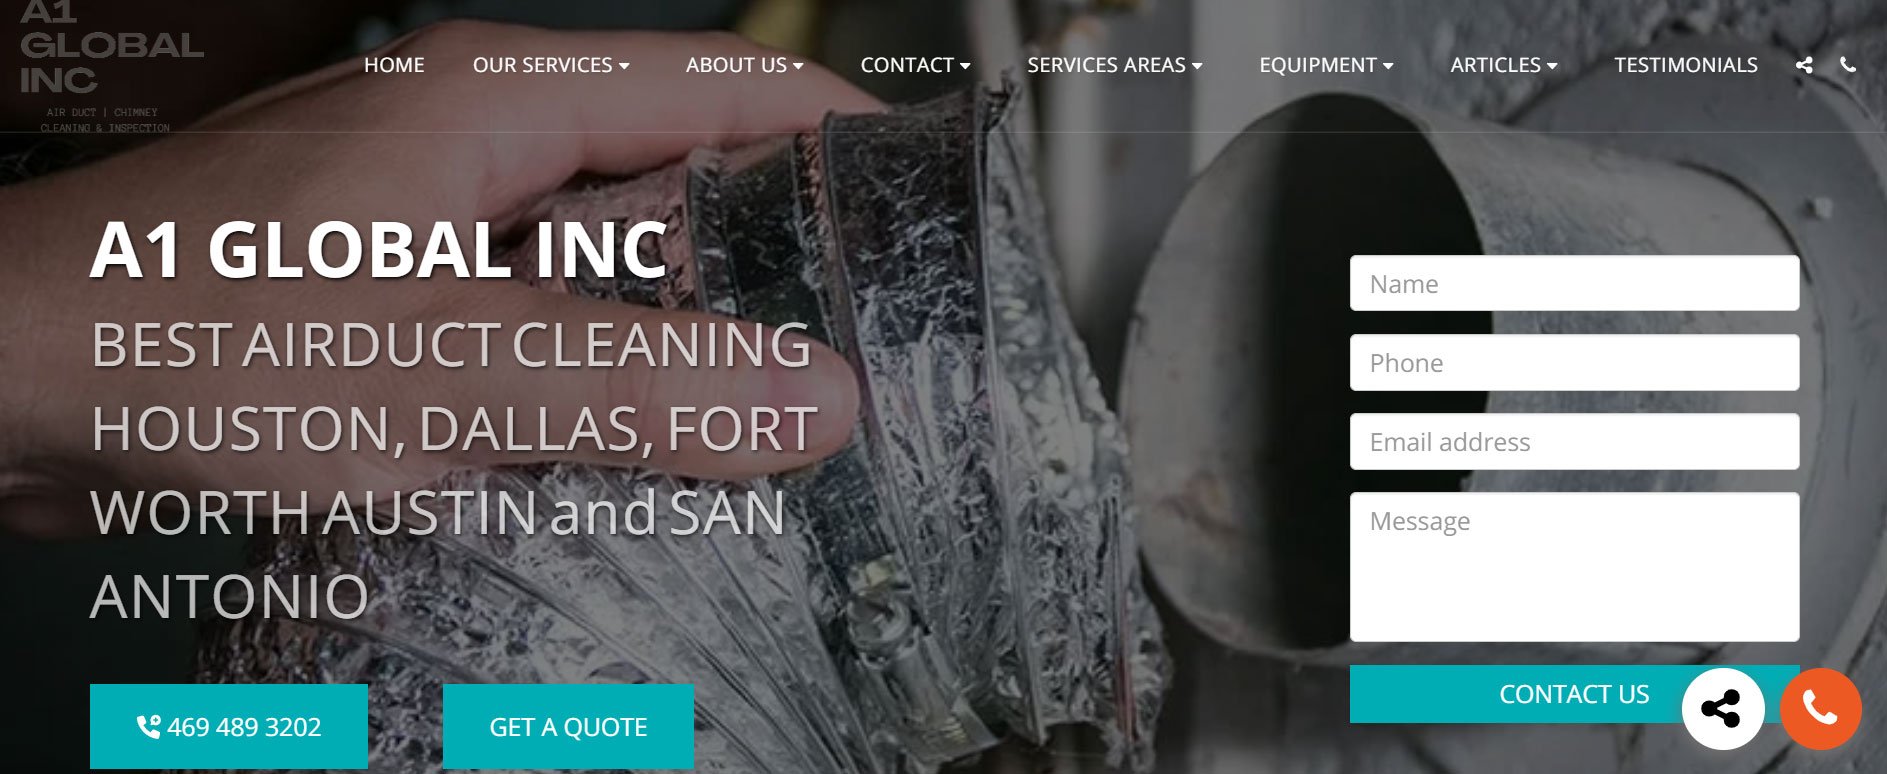 AIR DUCT CLEANING AT SAN ANTONIO